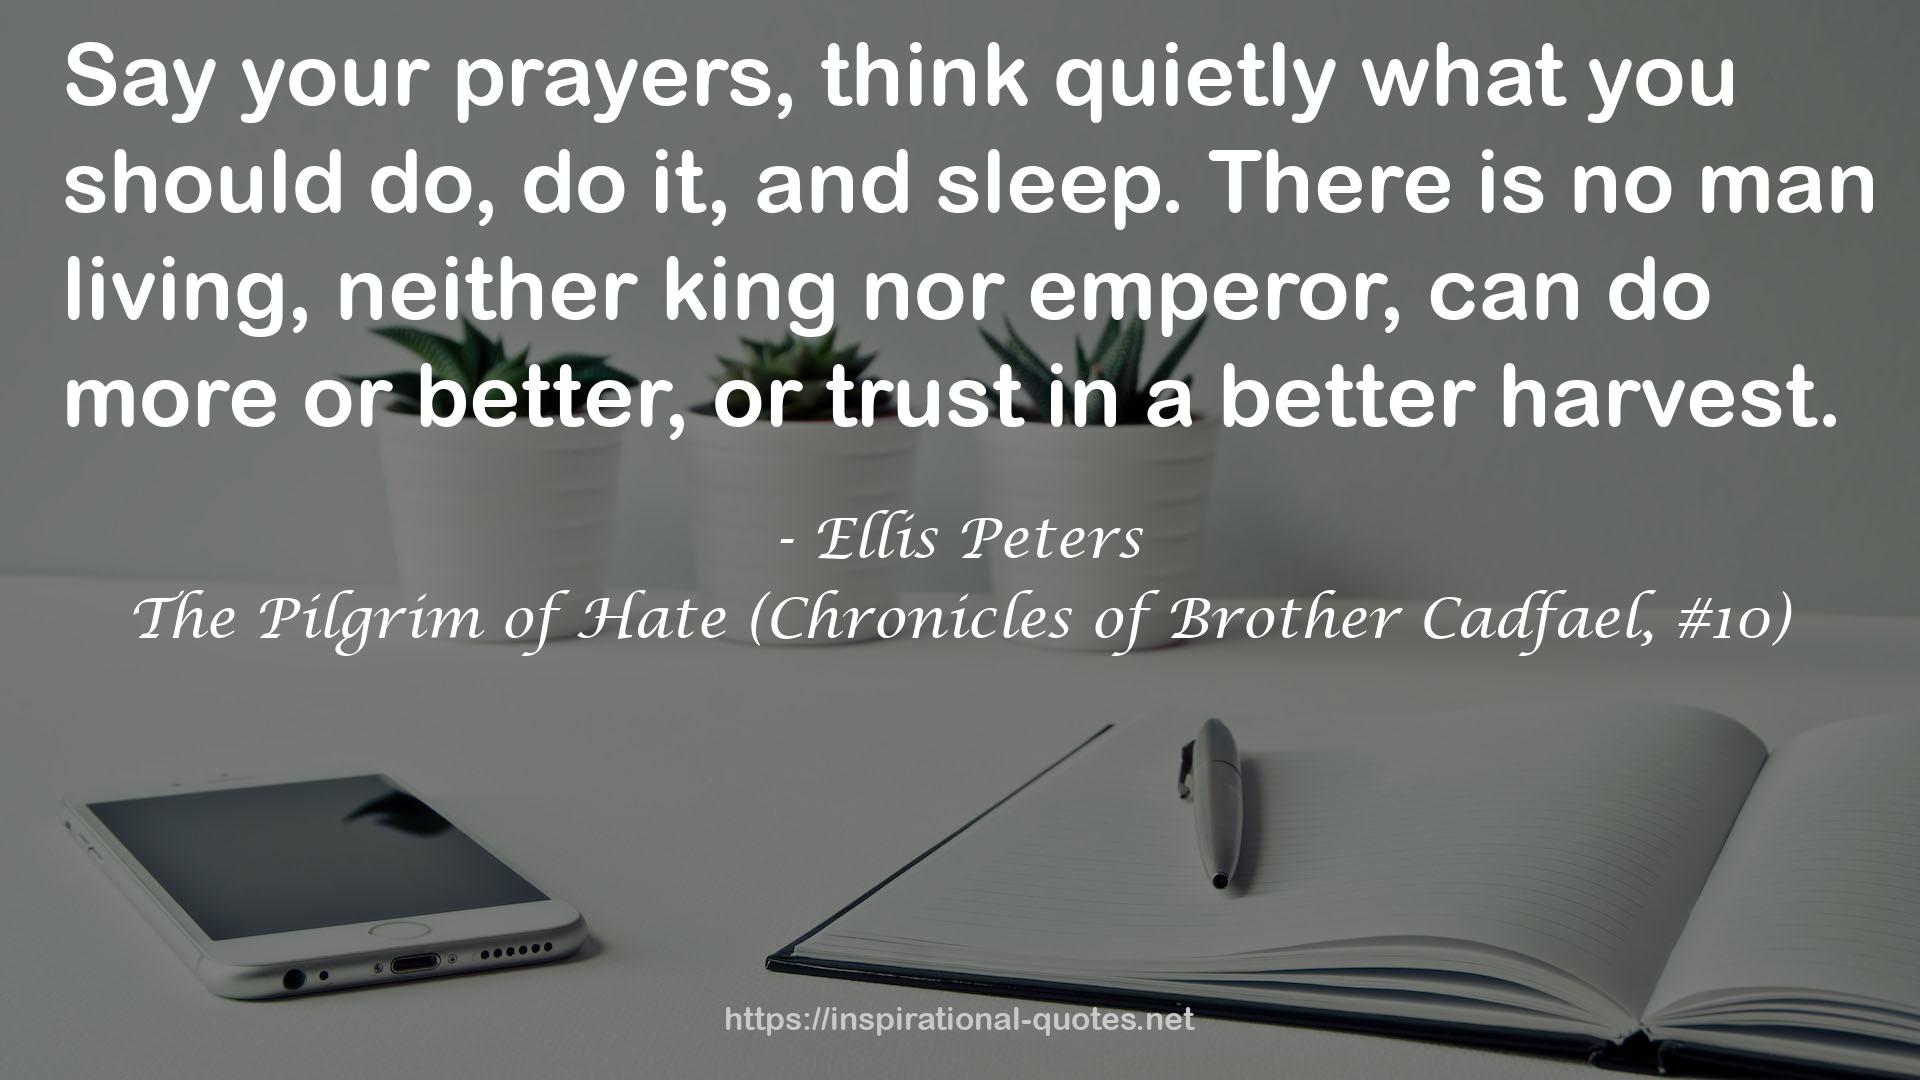 The Pilgrim of Hate (Chronicles of Brother Cadfael, #10) QUOTES